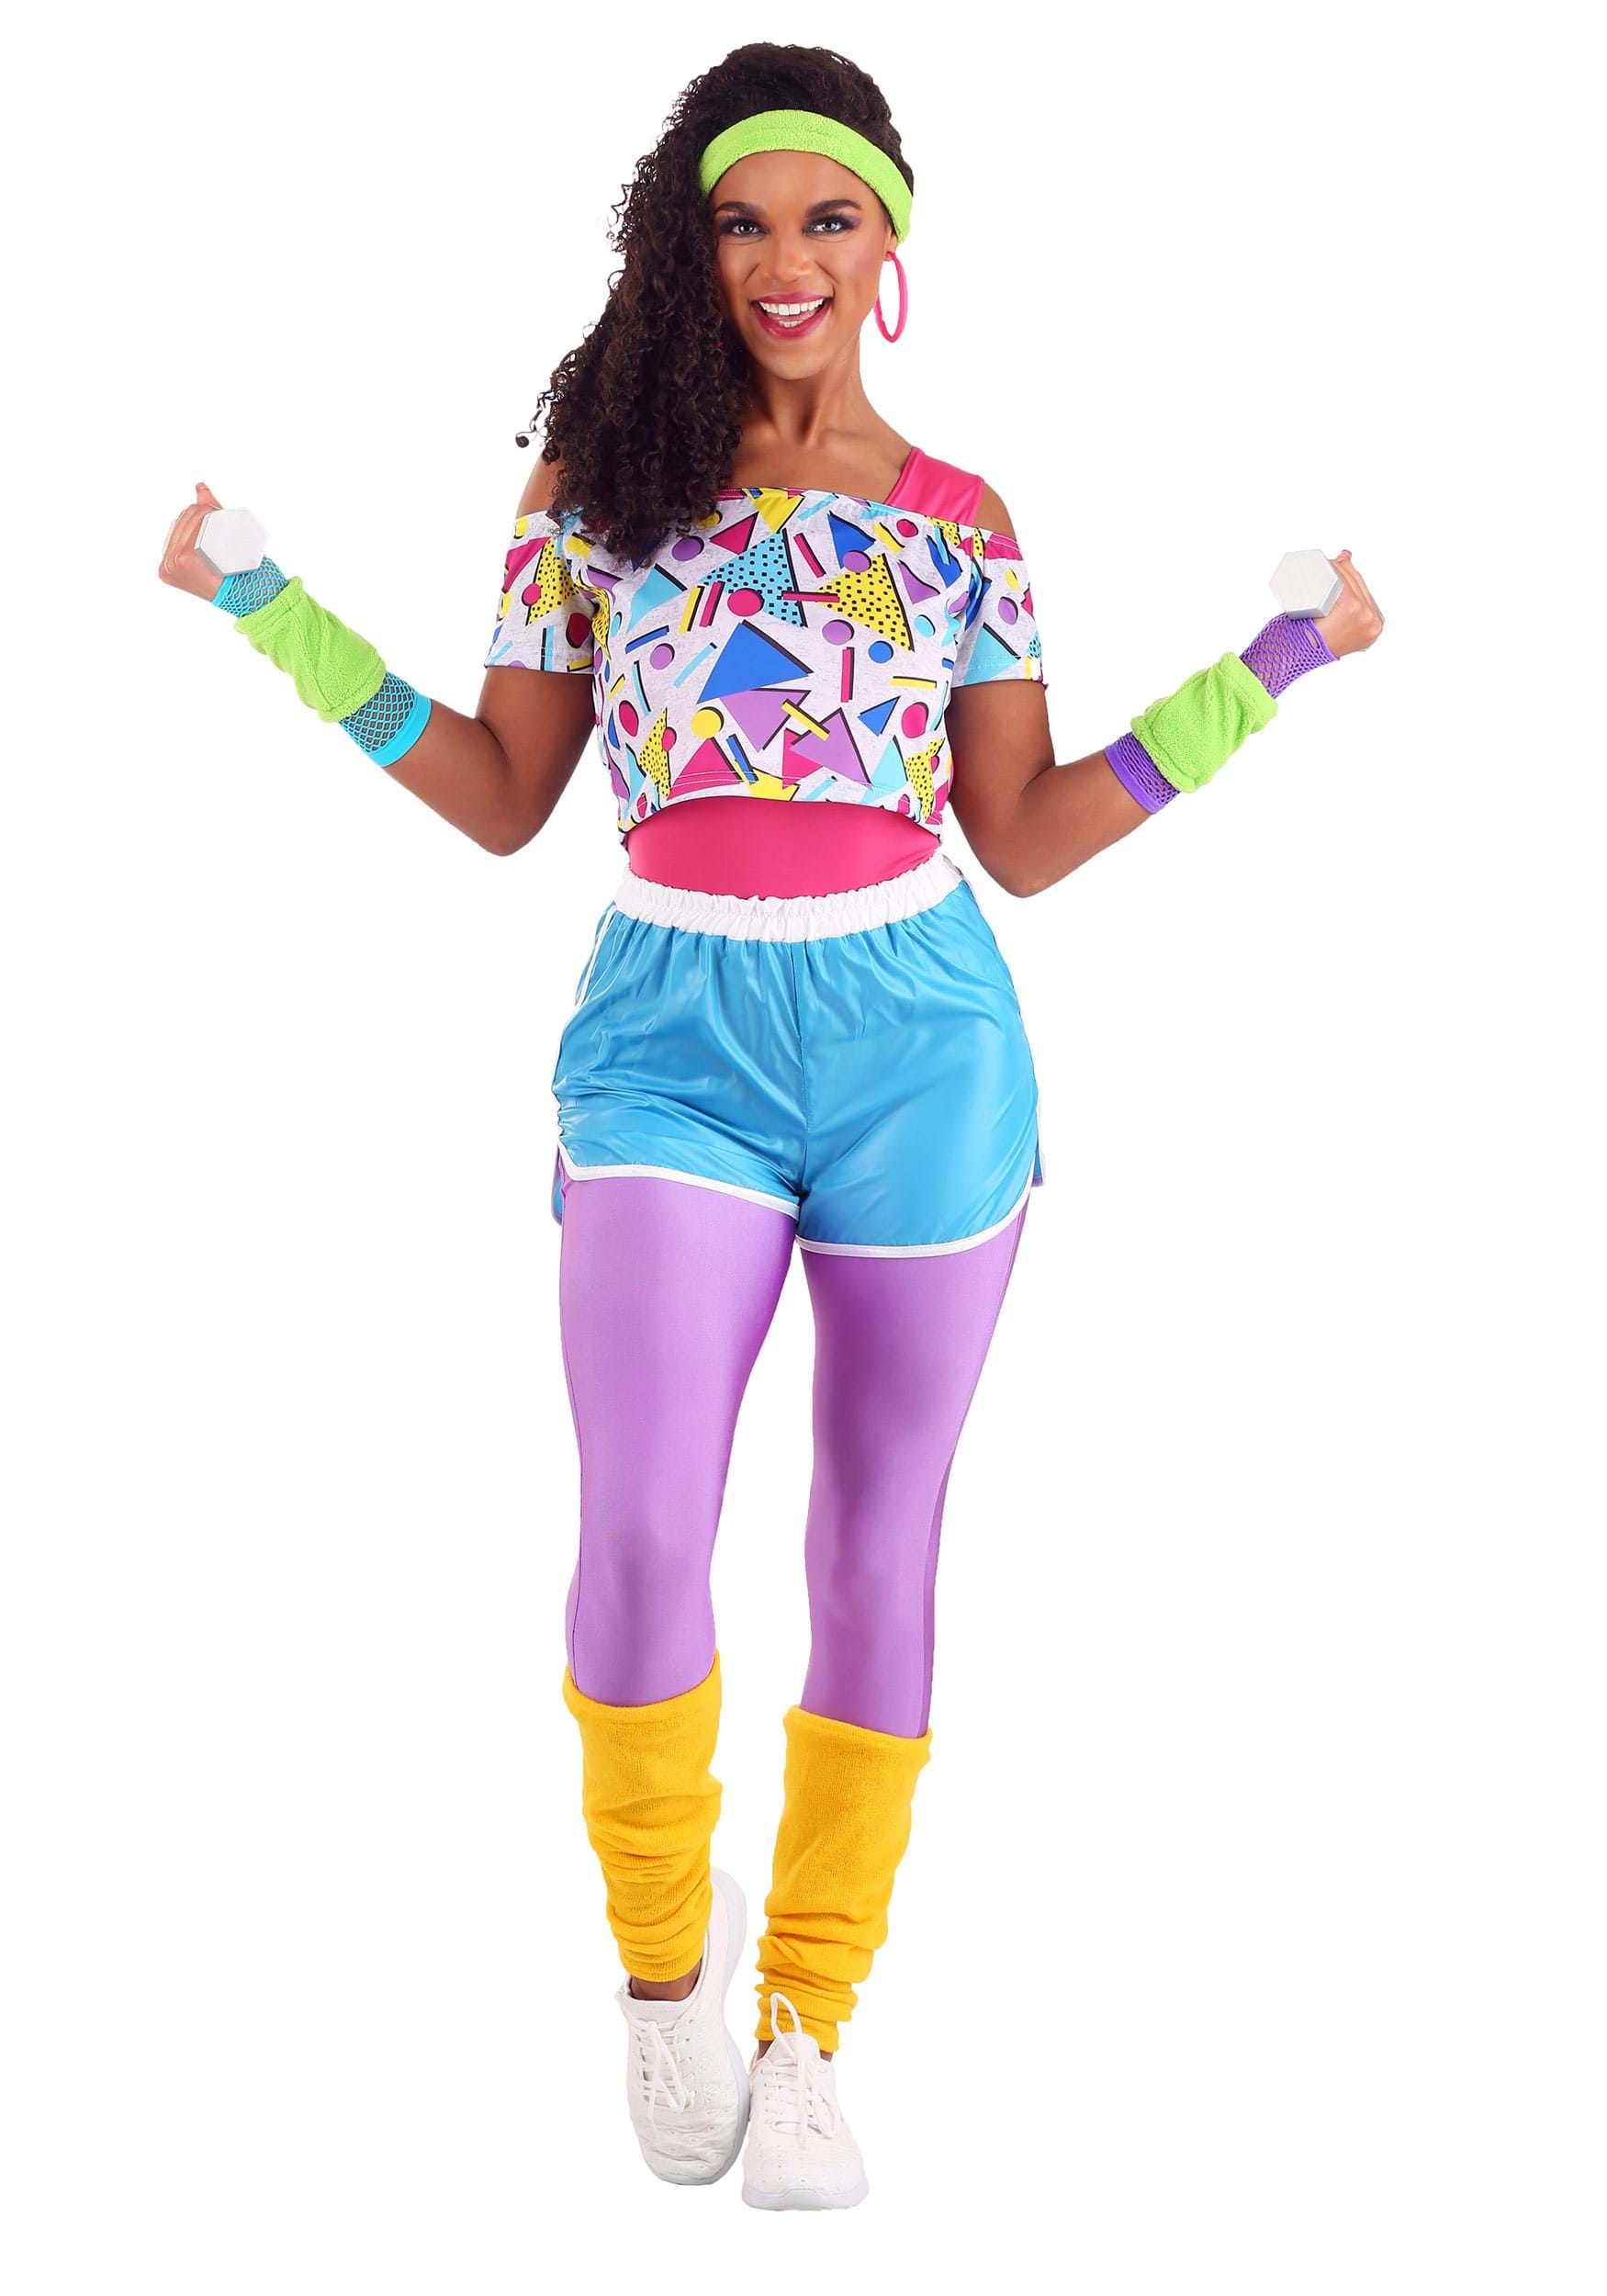 Gallery For > Outfits With Leg Warmers 80s  80s theme party outfits, 80s  party outfits, Geek chic outfits